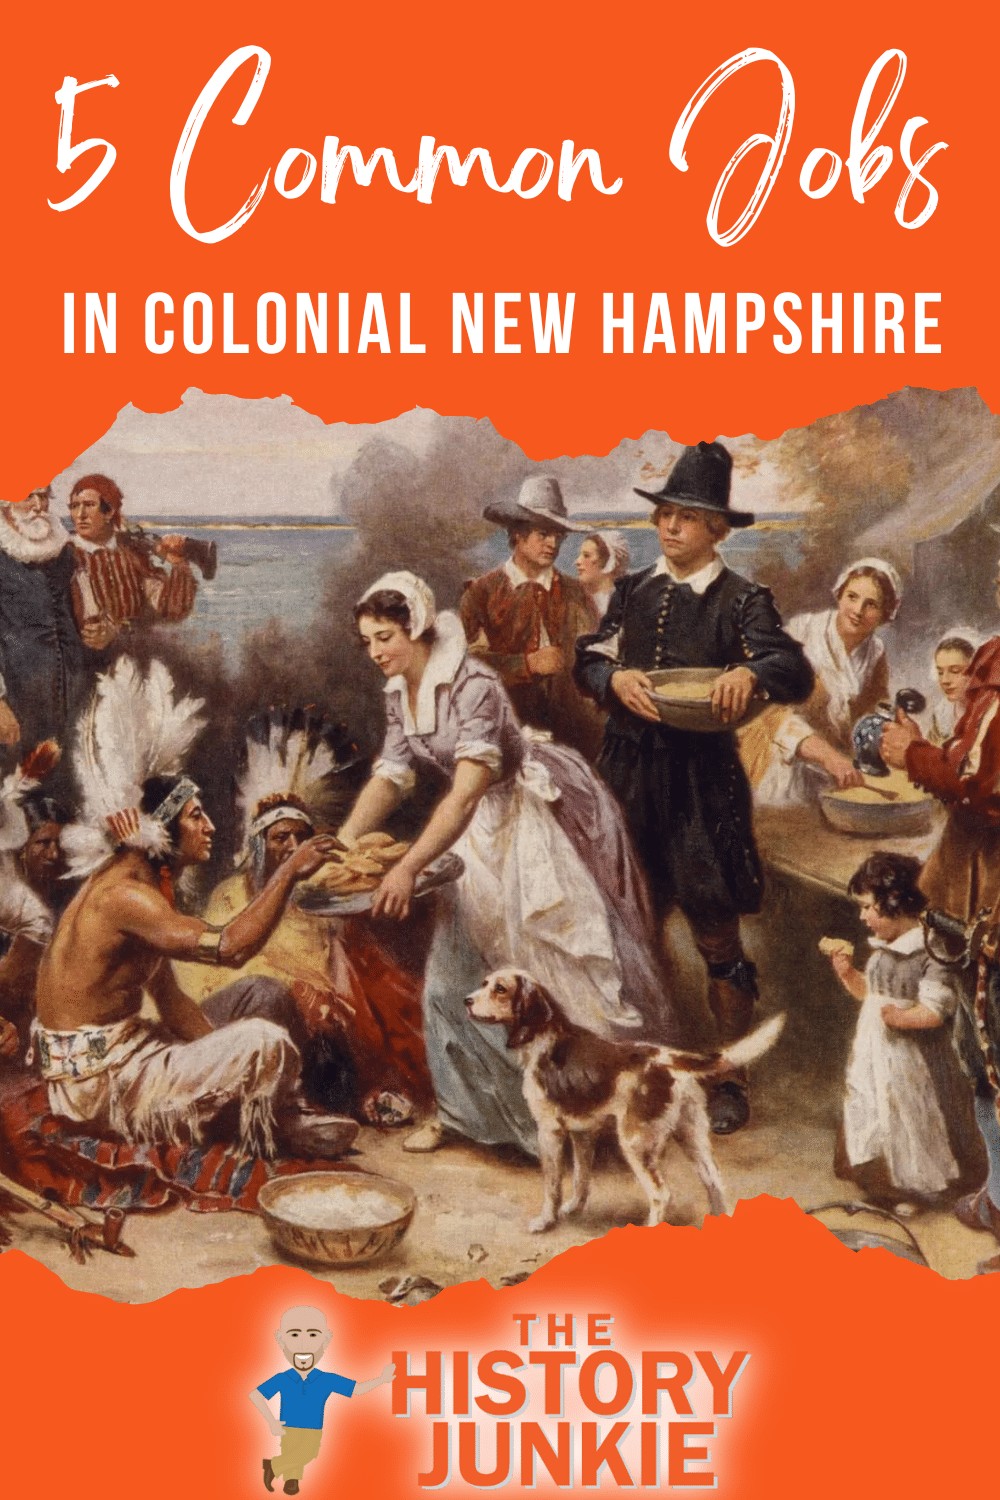 Jobs in Colonial New Hampshire